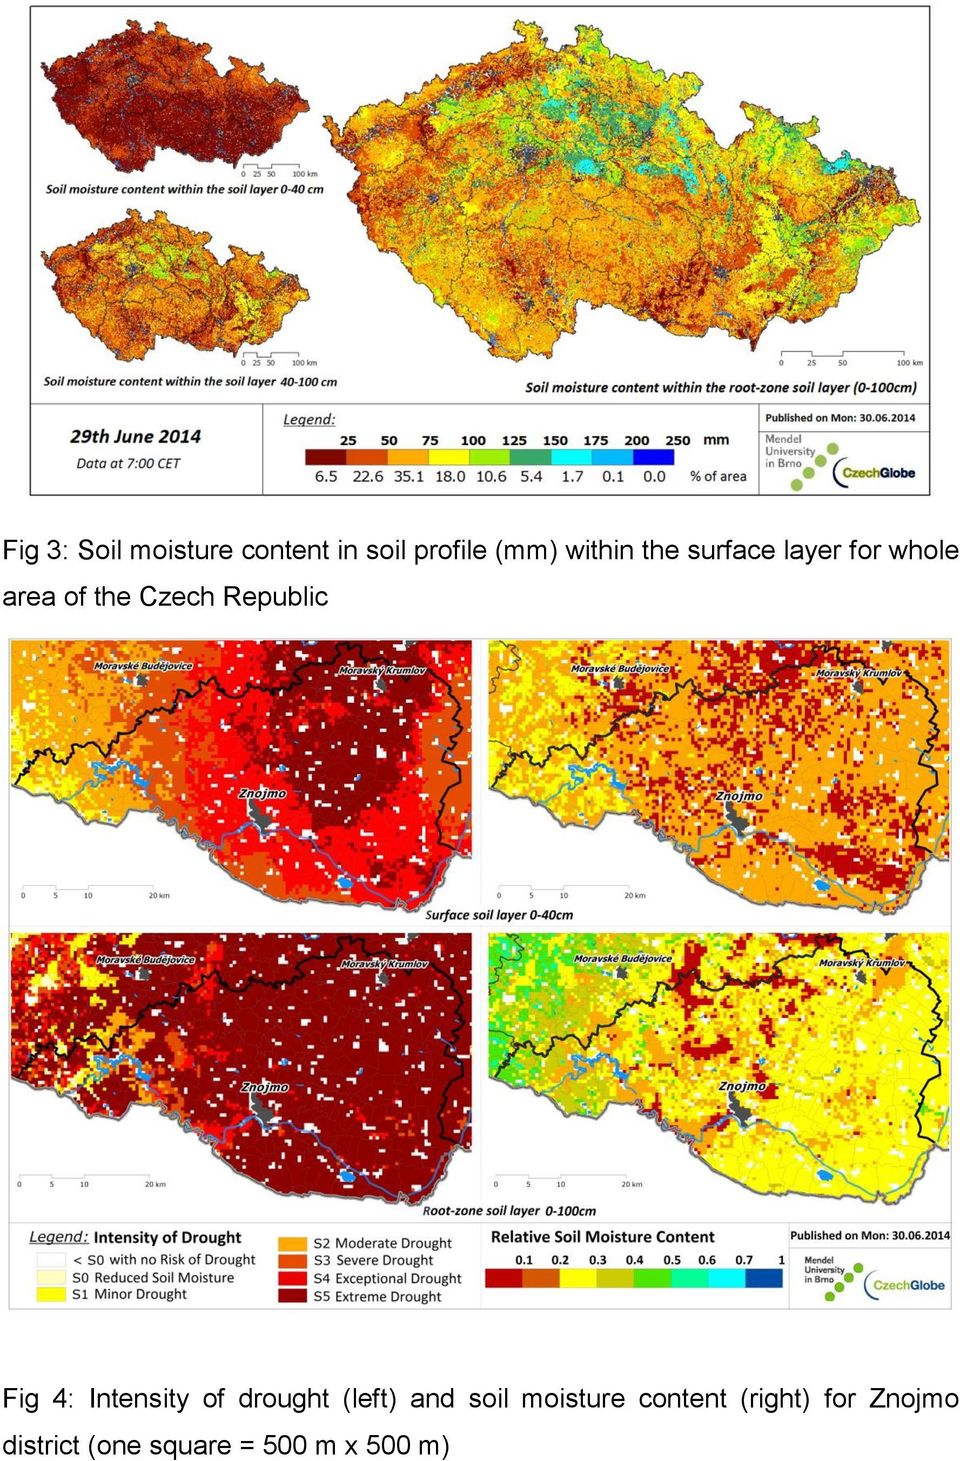 Fig 4: Intensity of drought (left) and soil moisture